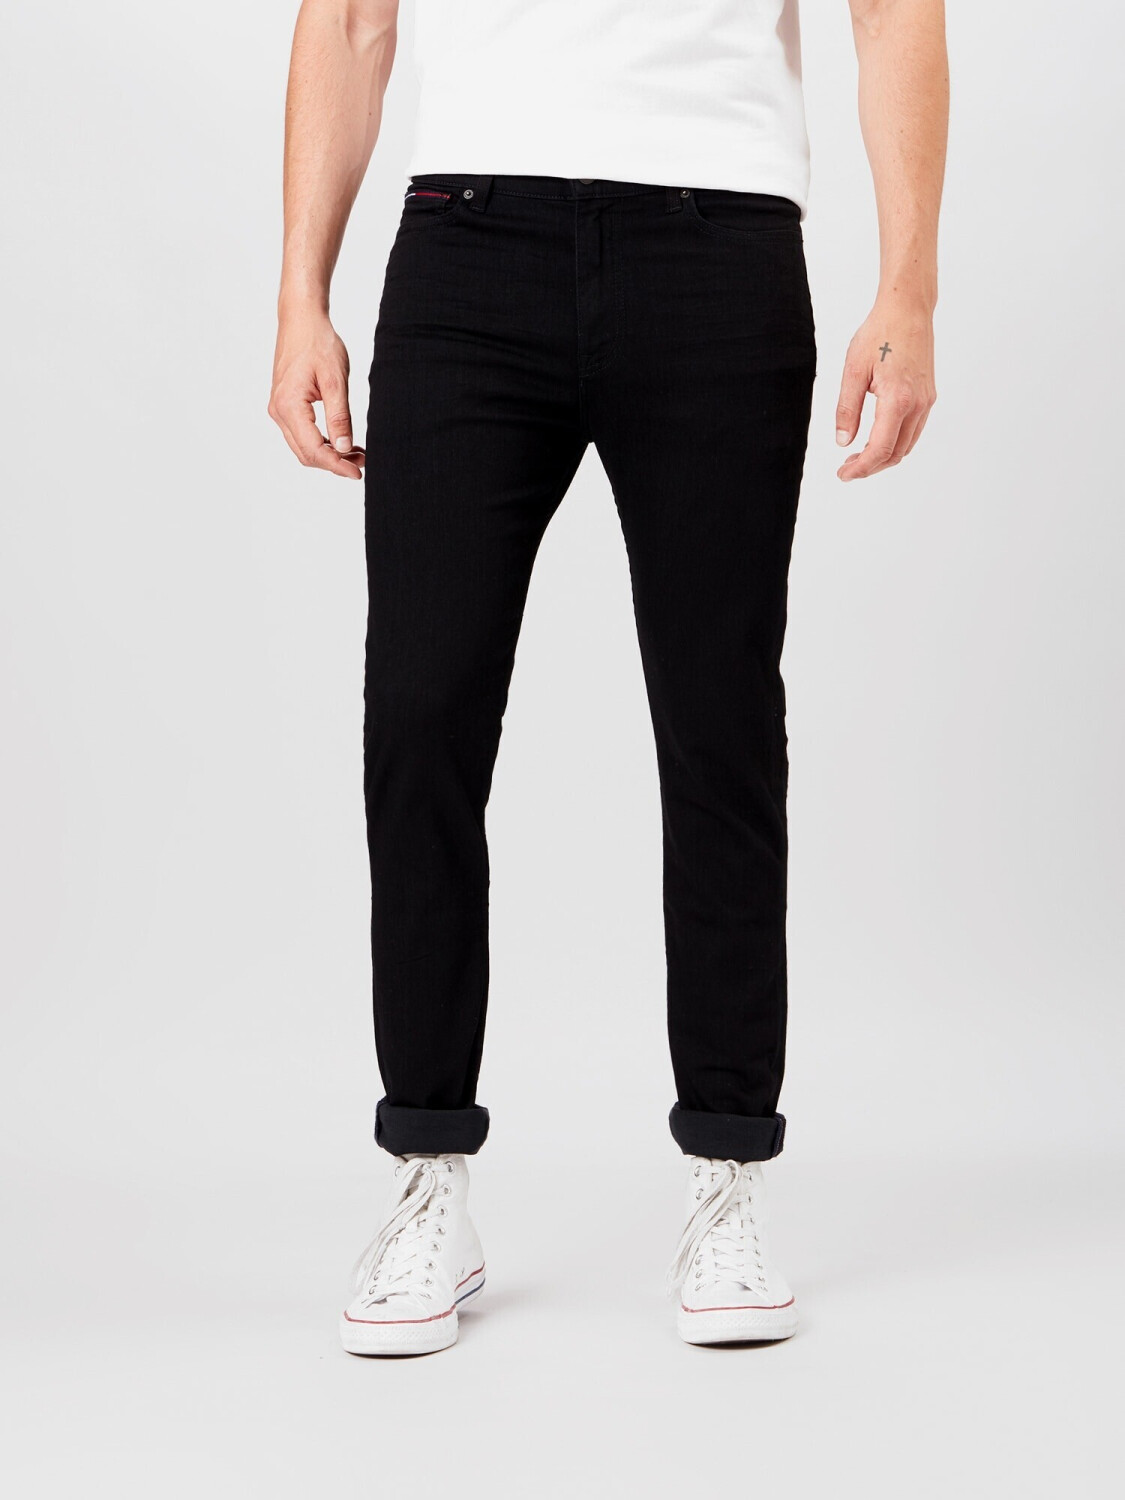 Buy Tommy Hilfiger Simon Skinny Fit Black Jeans new black stretch from ...